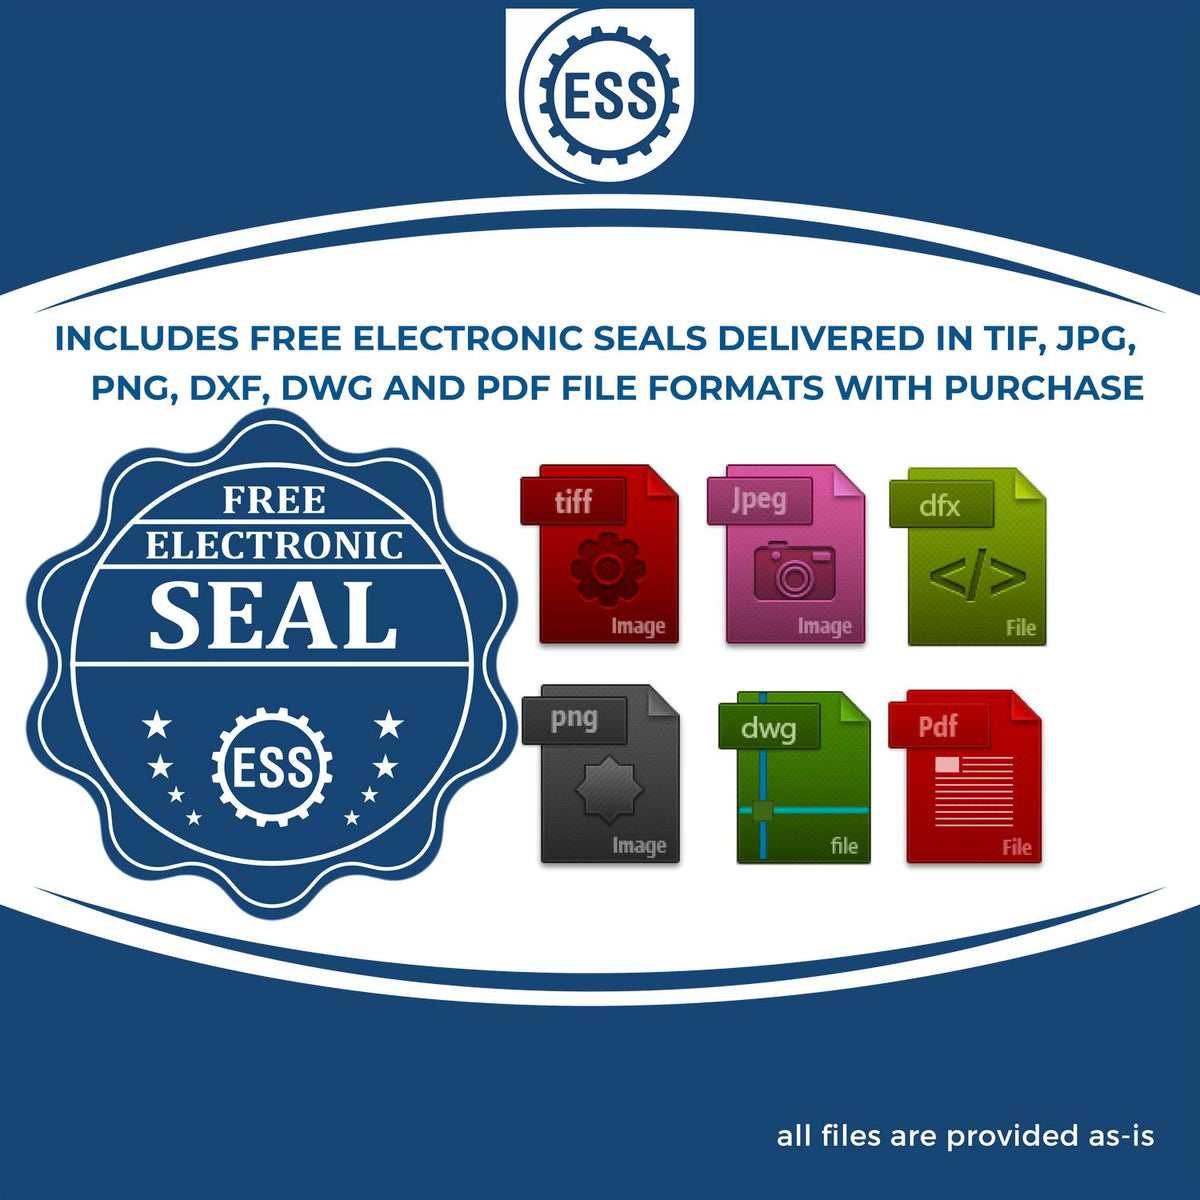 An infographic for the free electronic seal for the Hybrid North Carolina Engineer Seal illustrating the different file type icons such as DXF, DWG, TIF, JPG and PNG.